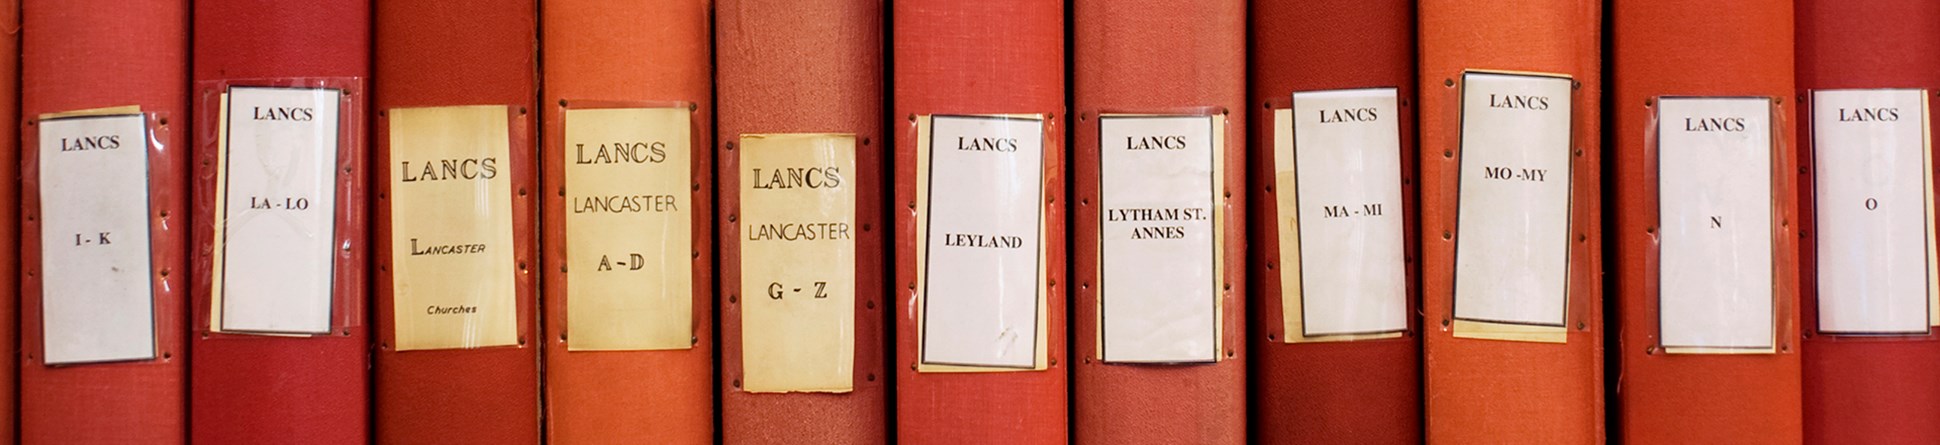 Red boxes on a shelf labelled with Lancashire placenames, part of the Architectural Red Box Collection.